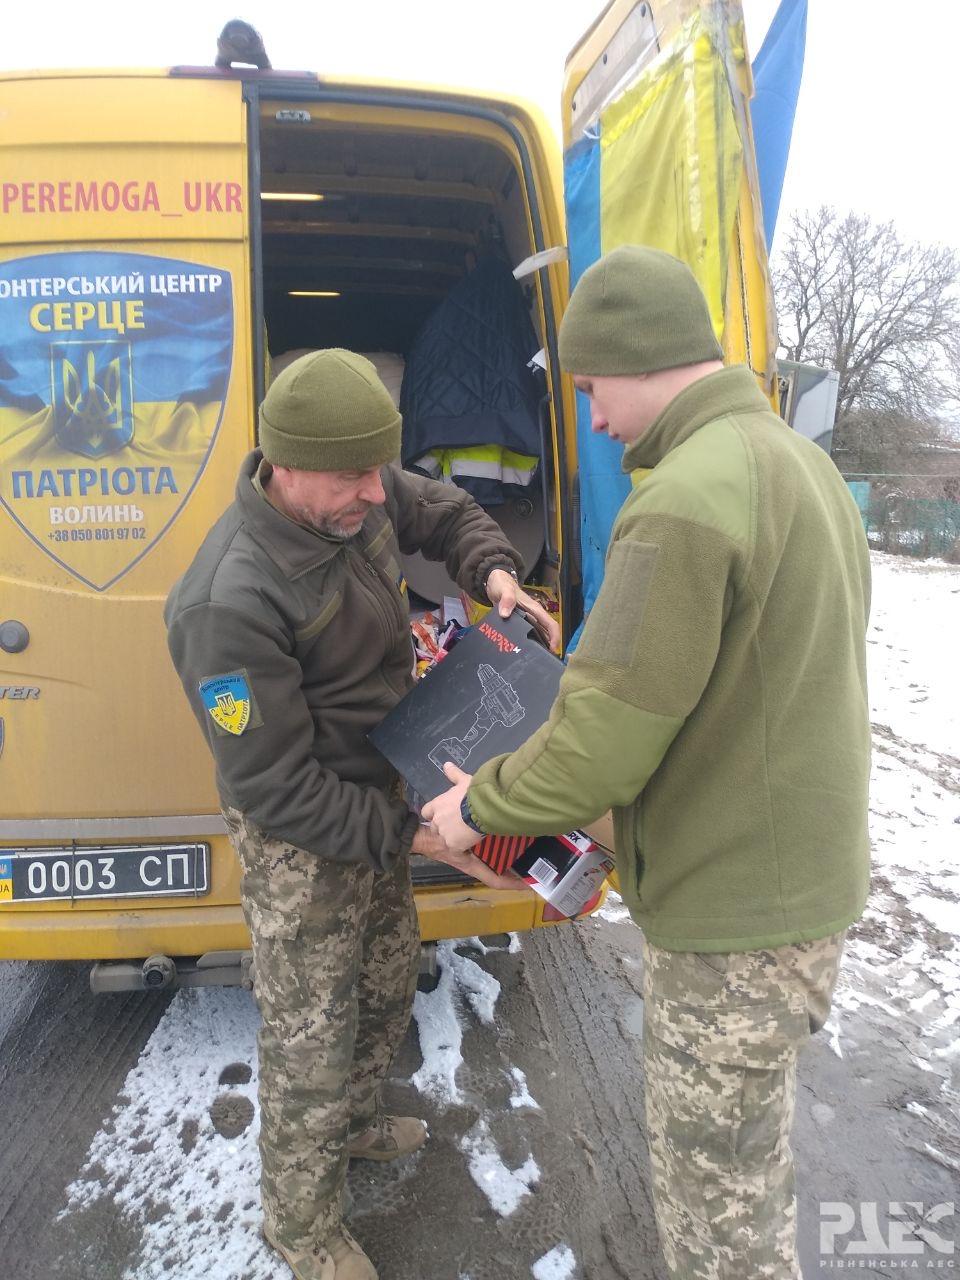 Employees of Rivne Nuclear Power Plant Gave Humanitarian Assistance to Servicemen of 130th Separate Reconnaissance Battalion Once Again